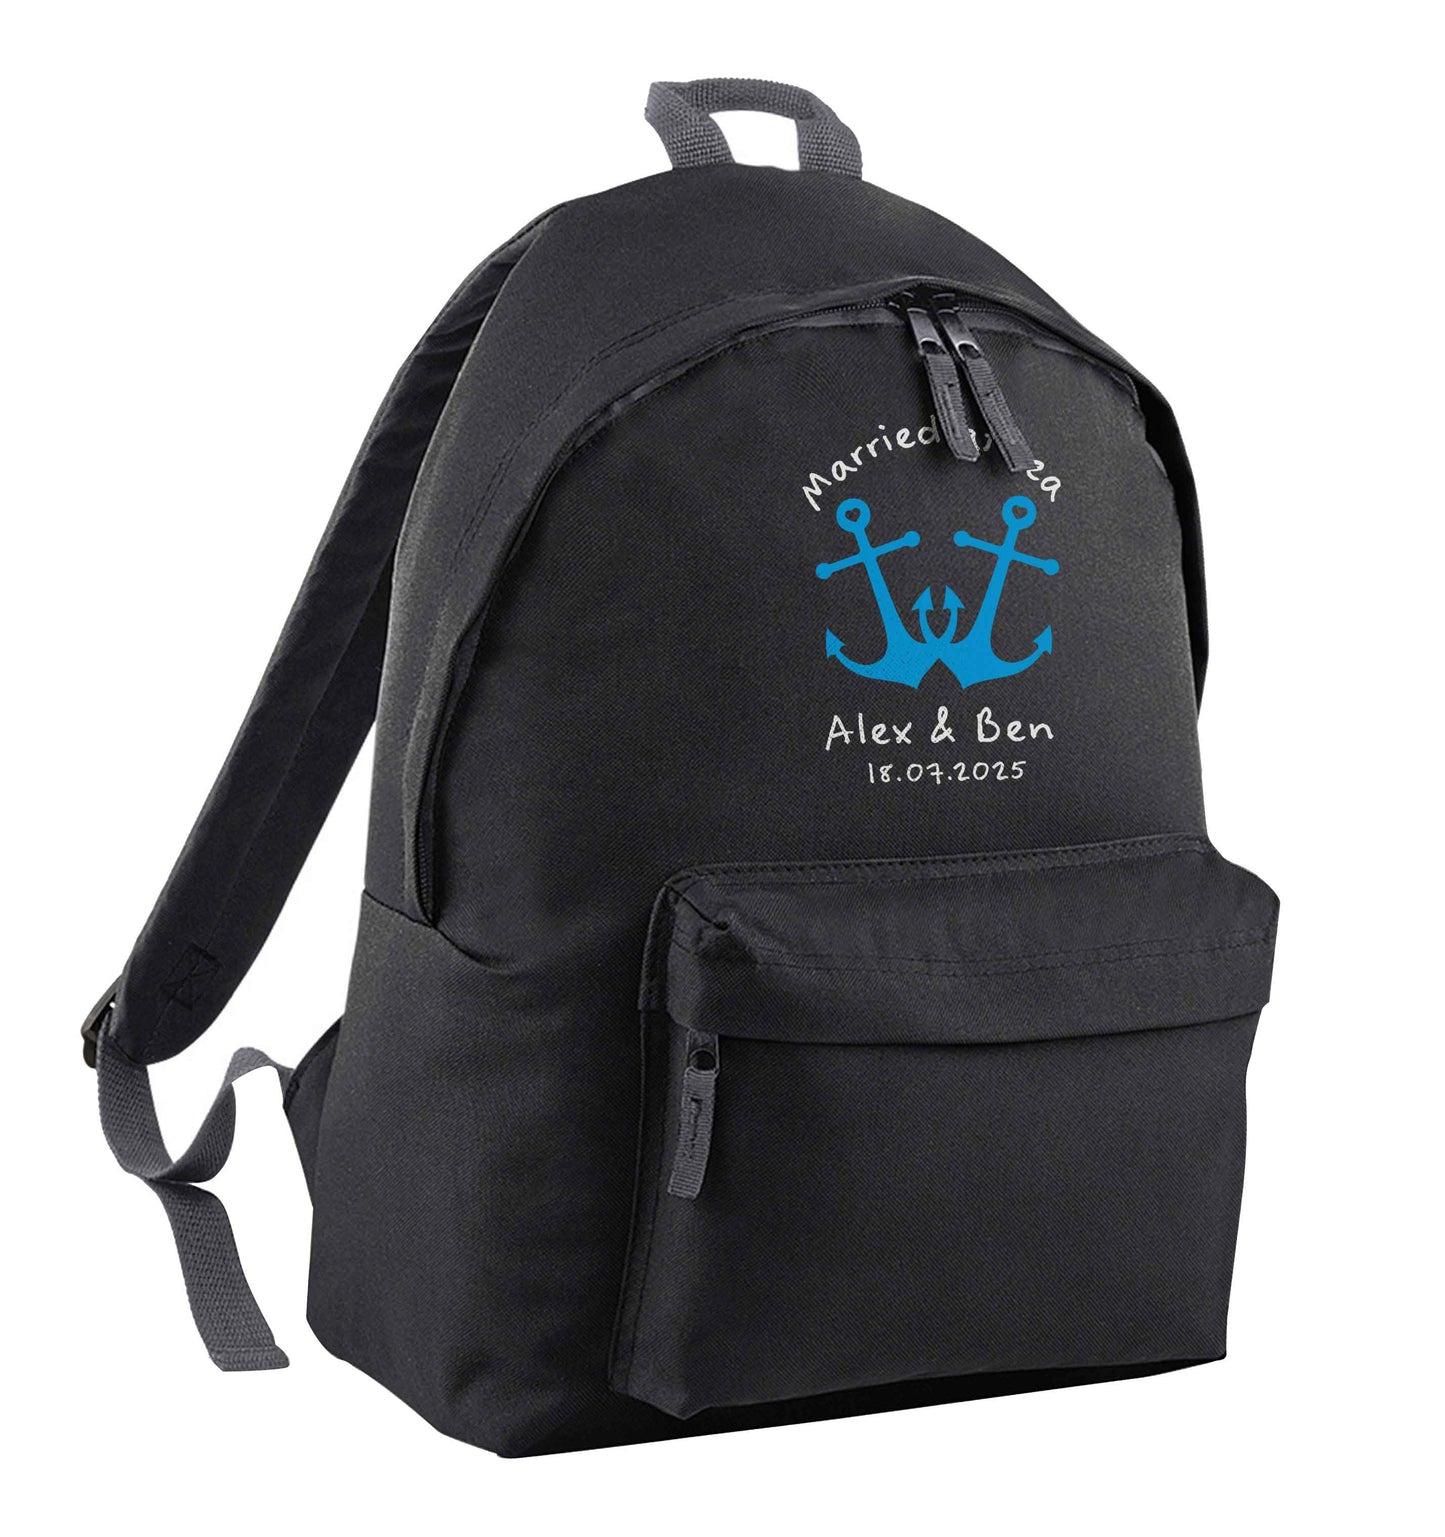 Married at sea blue anchors black adults backpack